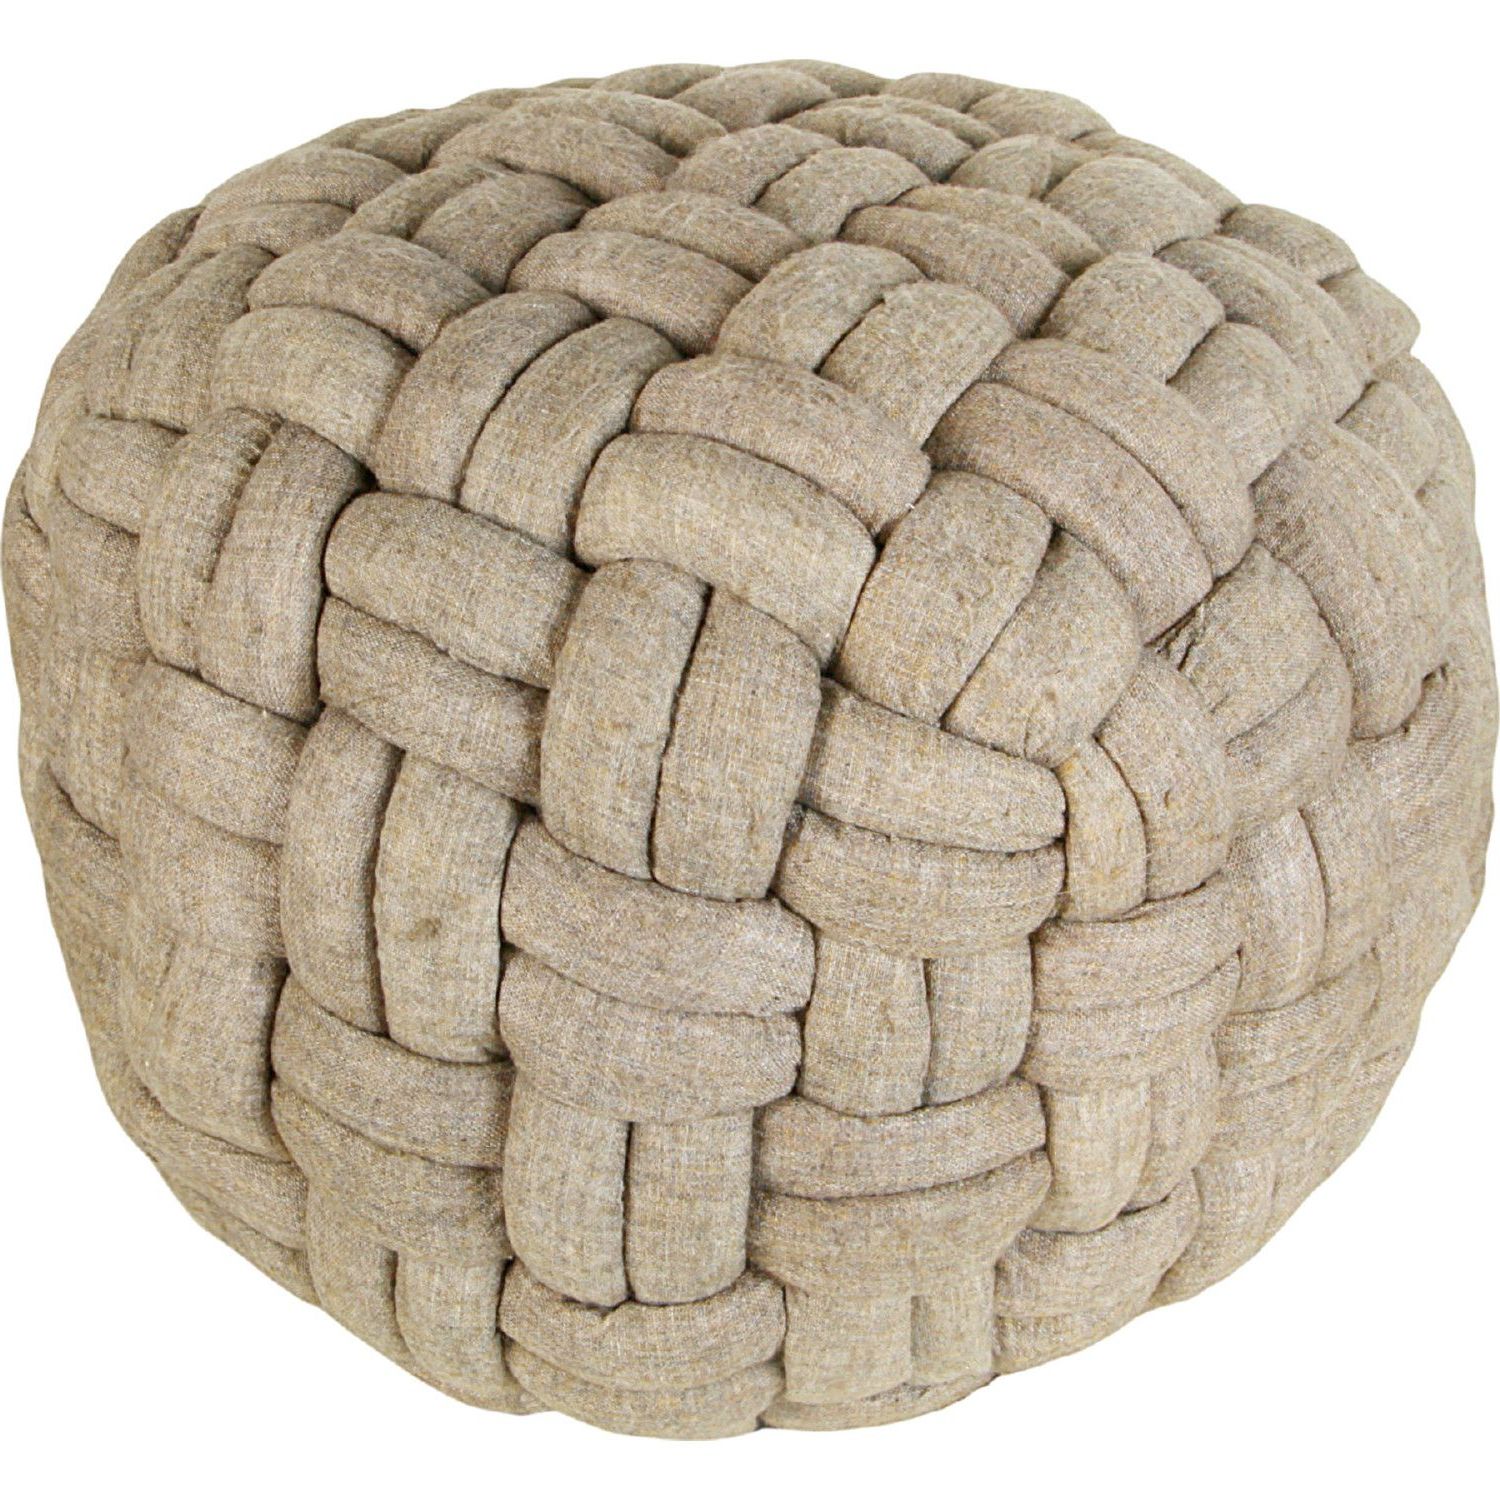 Favorite Moe's Home Collection Lk 1004 21 Bronya Pouf Cappuccino Pashmina Wool In Scandinavia Knit Tan Wool Cube Pouf Ottomans (View 6 of 10)